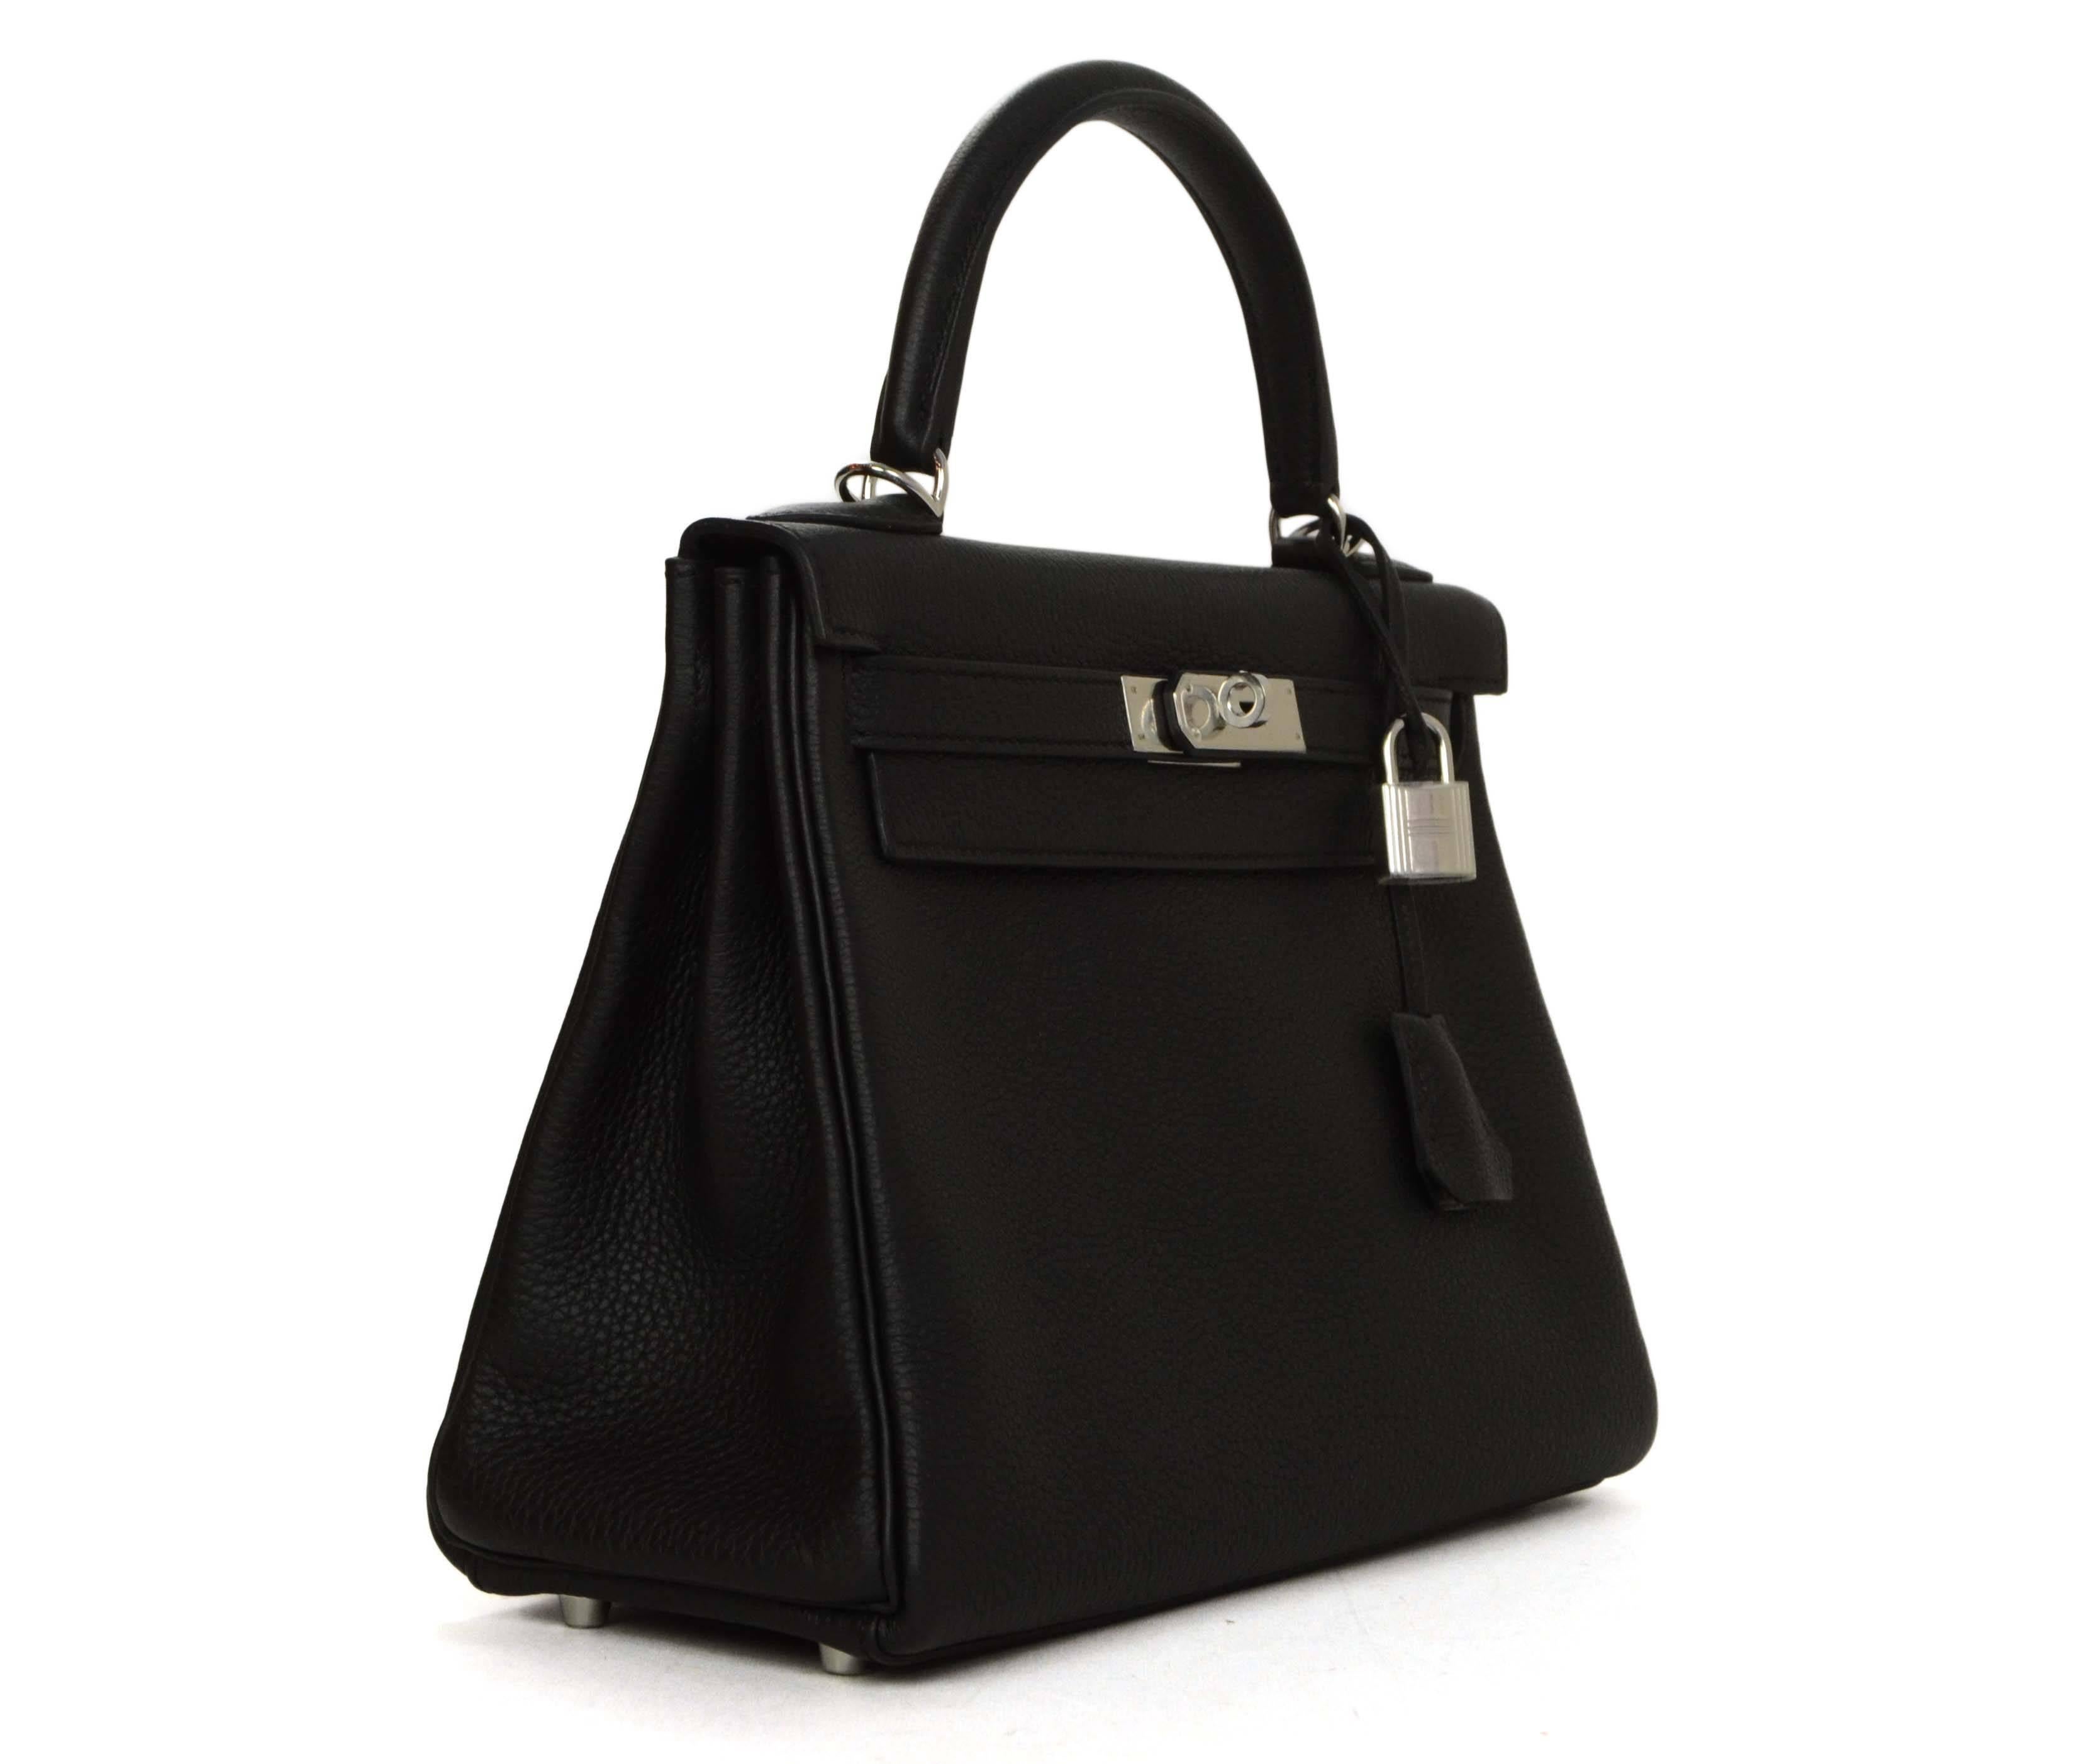 Hermes Black Togo 28cm Kelly Bag 
Features detachable shoulder strap
Made In: France
Year of Production: 2014
Color: Black and silvertone
Hardware: Palladium
Materials: Togo leather and metal
Lining: Black chevre leather
Closure/Opening: